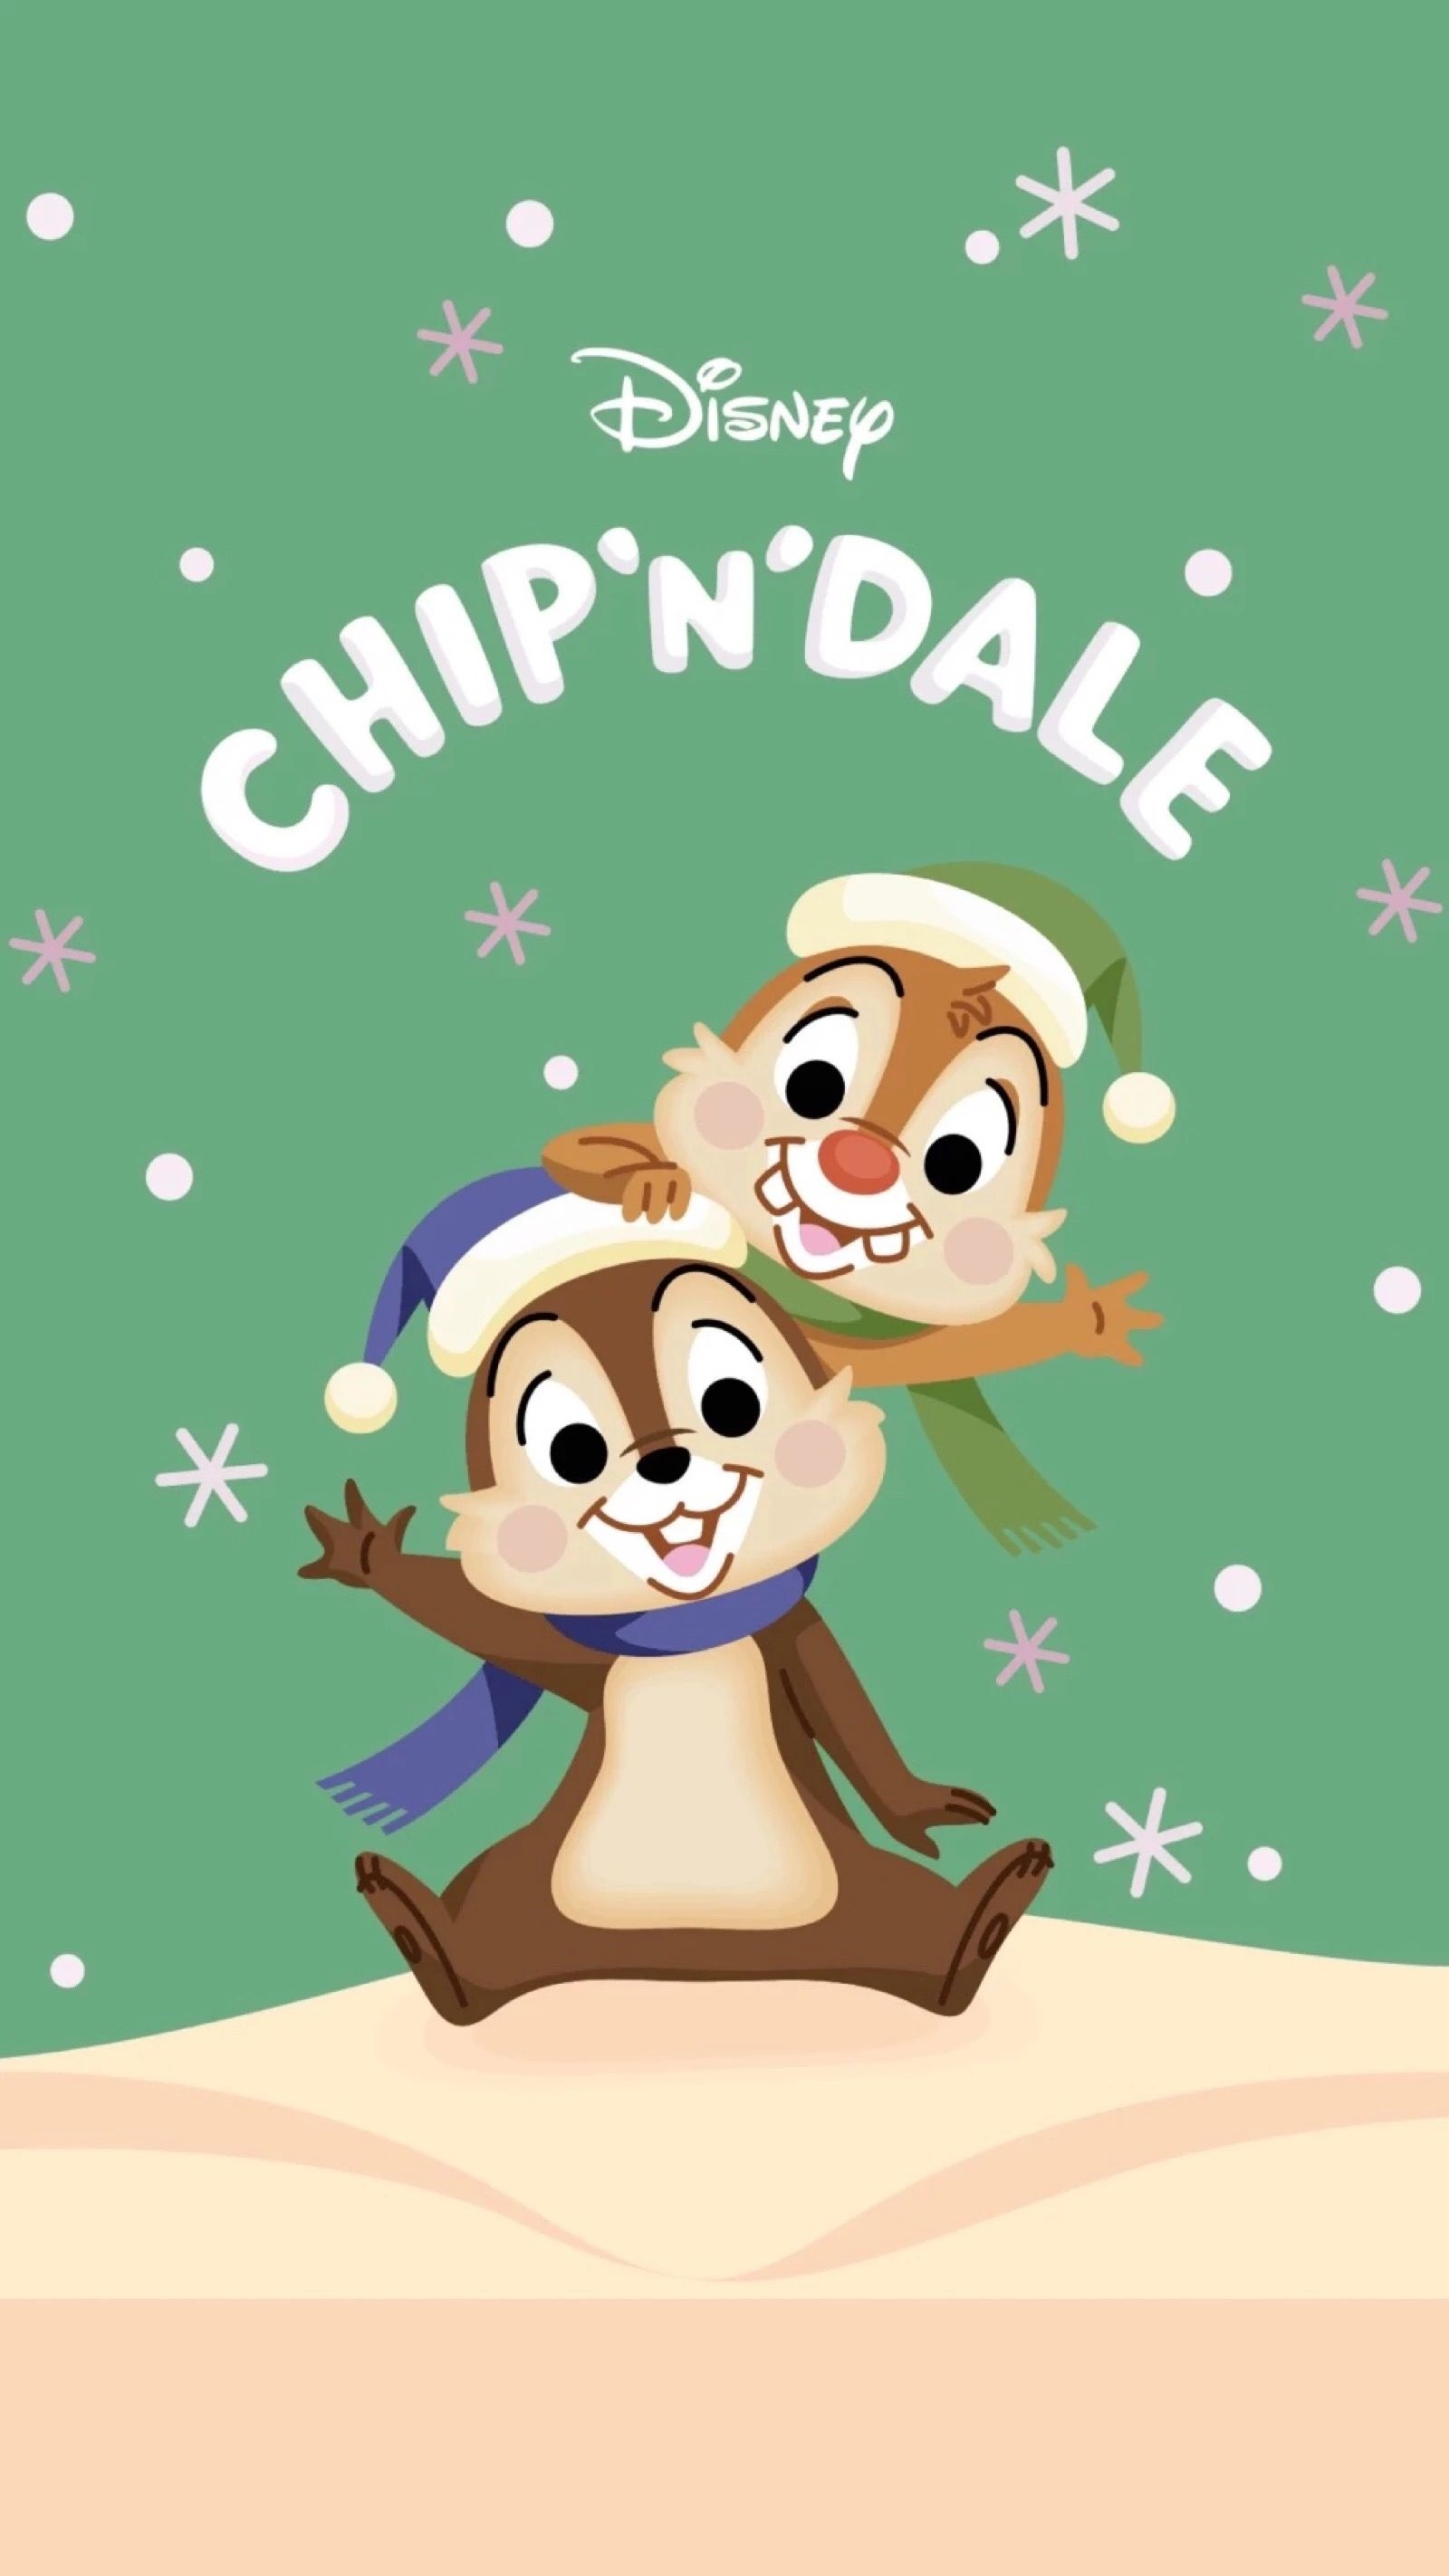 Chip 'n' Dale: Rescue Rangers, Playful wallpapers, Cartoonish charm, Disney animated series, 1600x2850 HD Handy